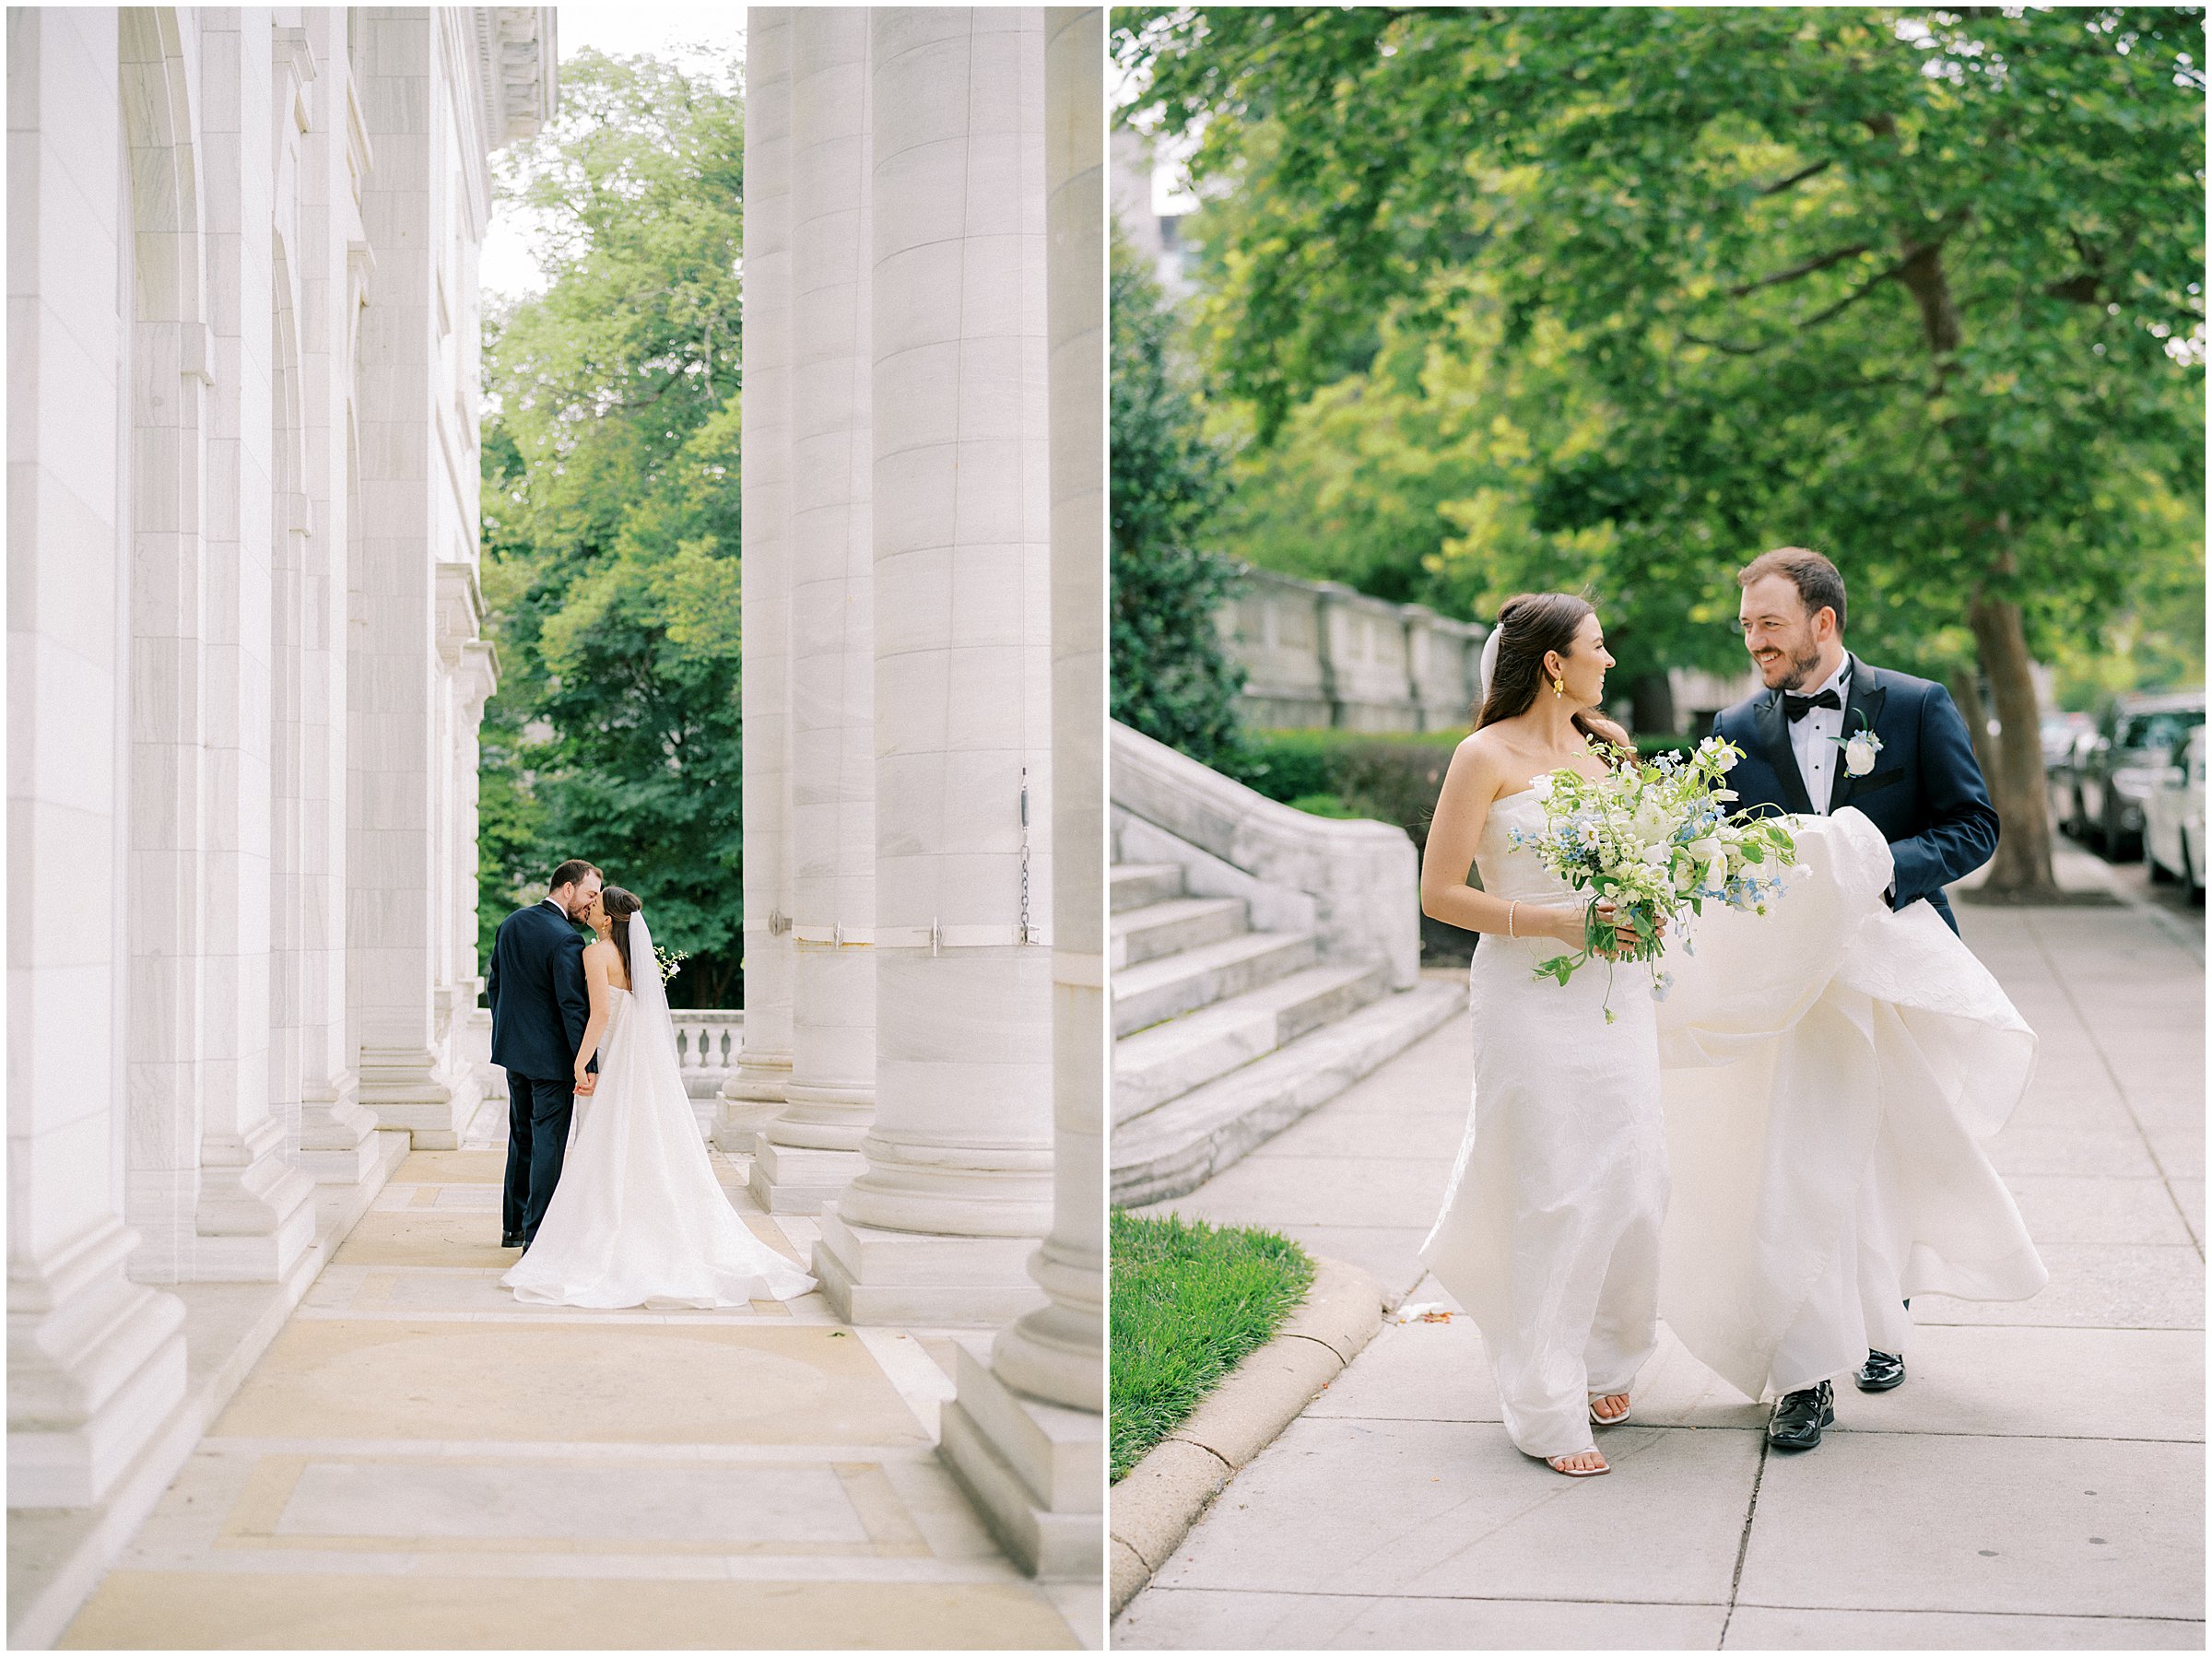 Bride and groom portraits at DAR Constitution Hall